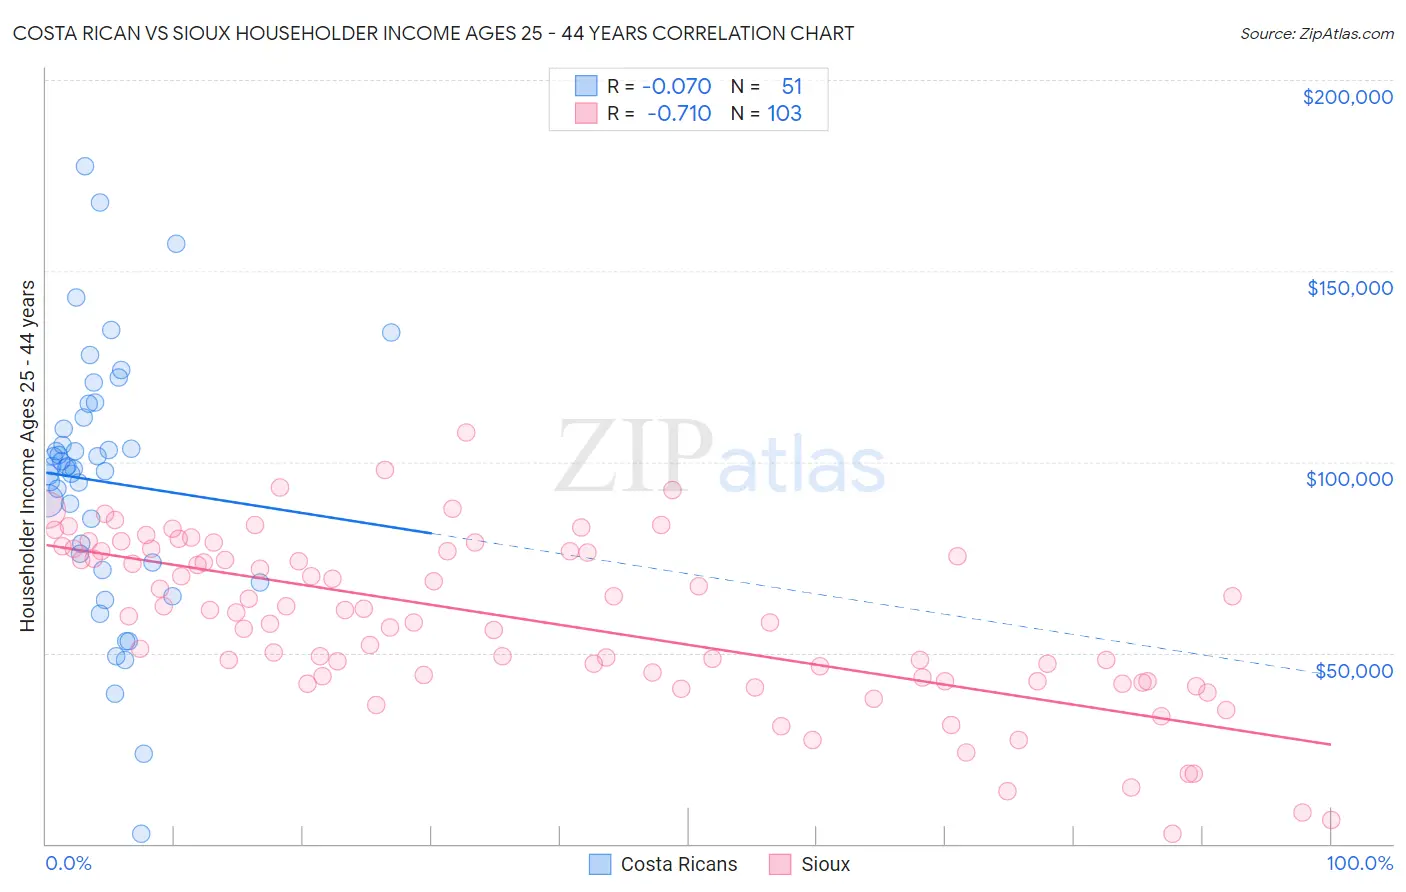 Costa Rican vs Sioux Householder Income Ages 25 - 44 years